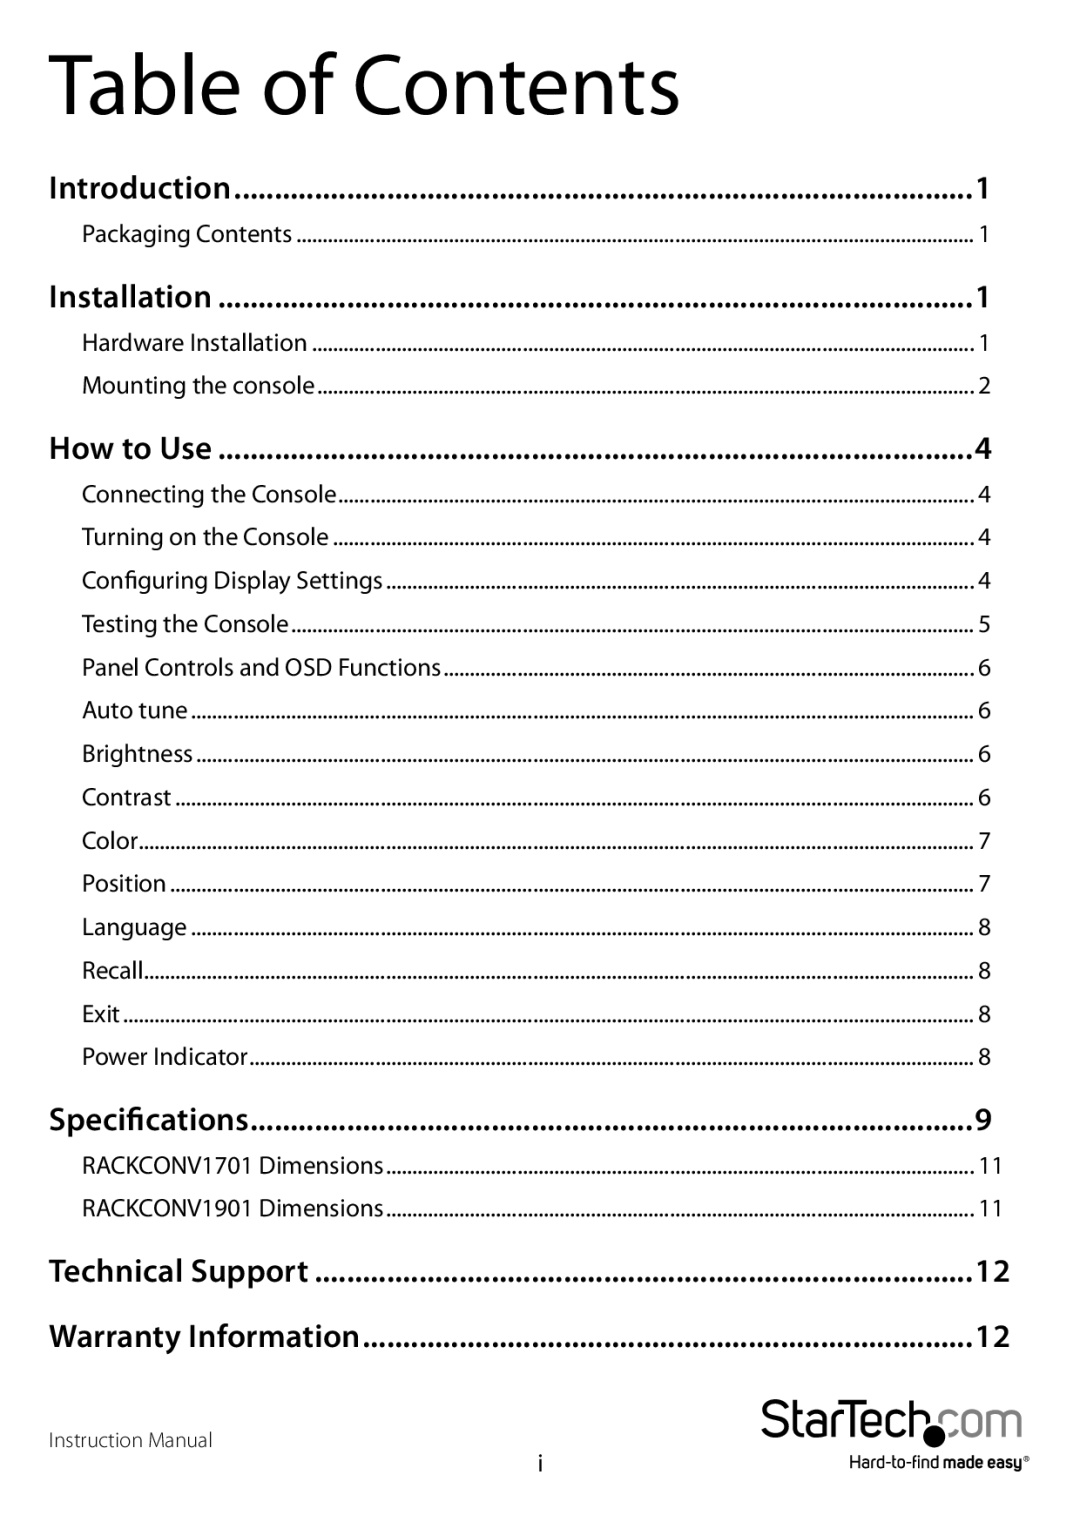 StarTech.com RACKCONV1901 Table of Contents, Introduction, Installation, How to Use, Specifications, Technical Support 